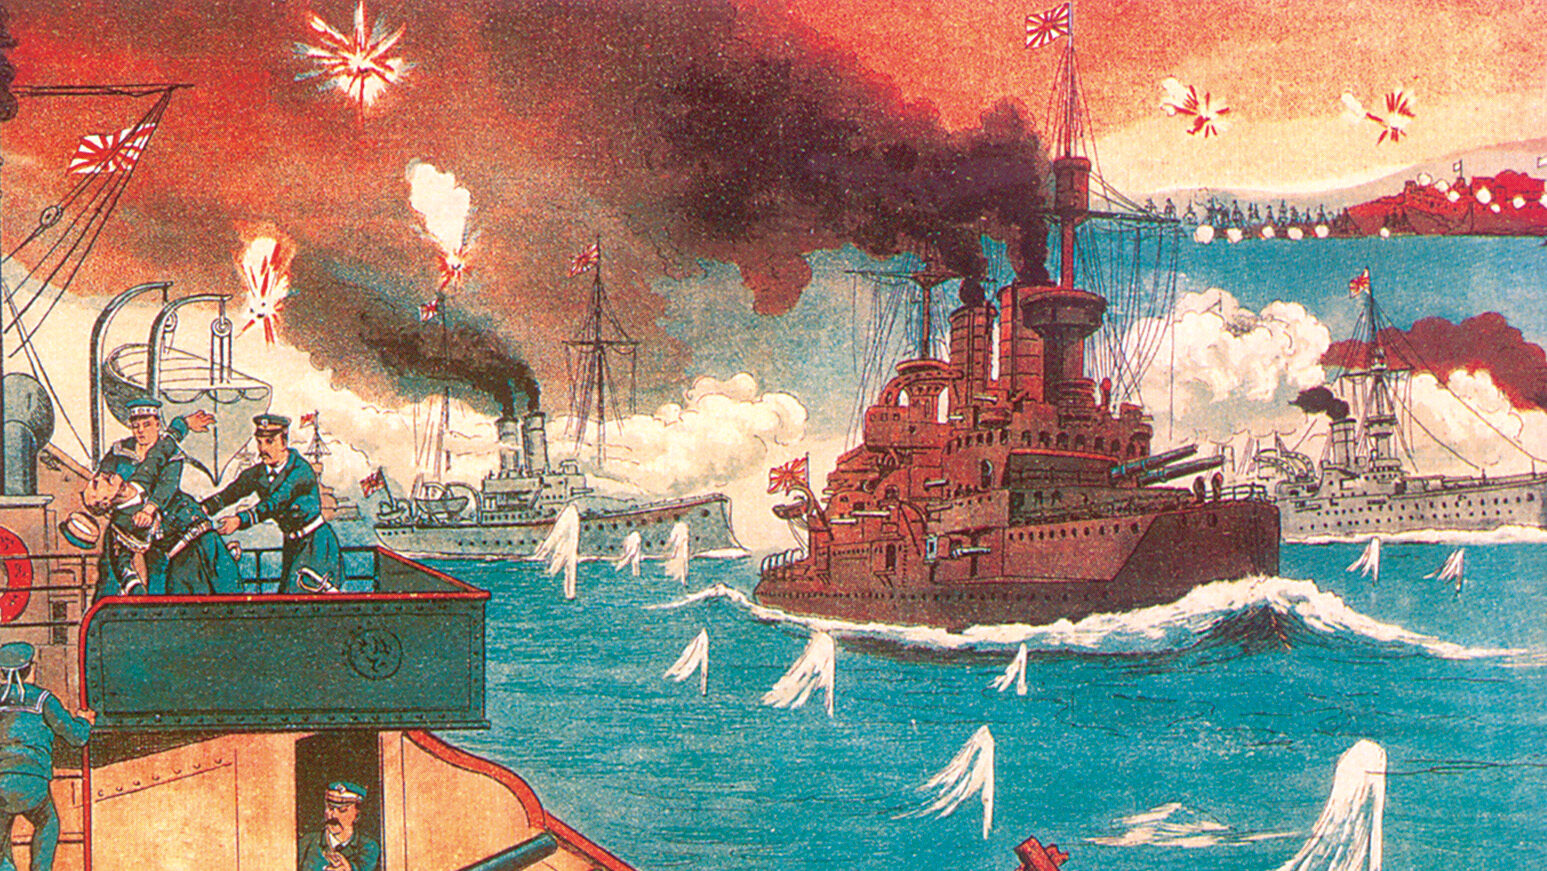 Japanese warships steam into Port Arthur, Manchuria, bombarding Russian defenses and ships. Sidney Reilly purportedly sold Japanese information about the port when he lived there just before the war.